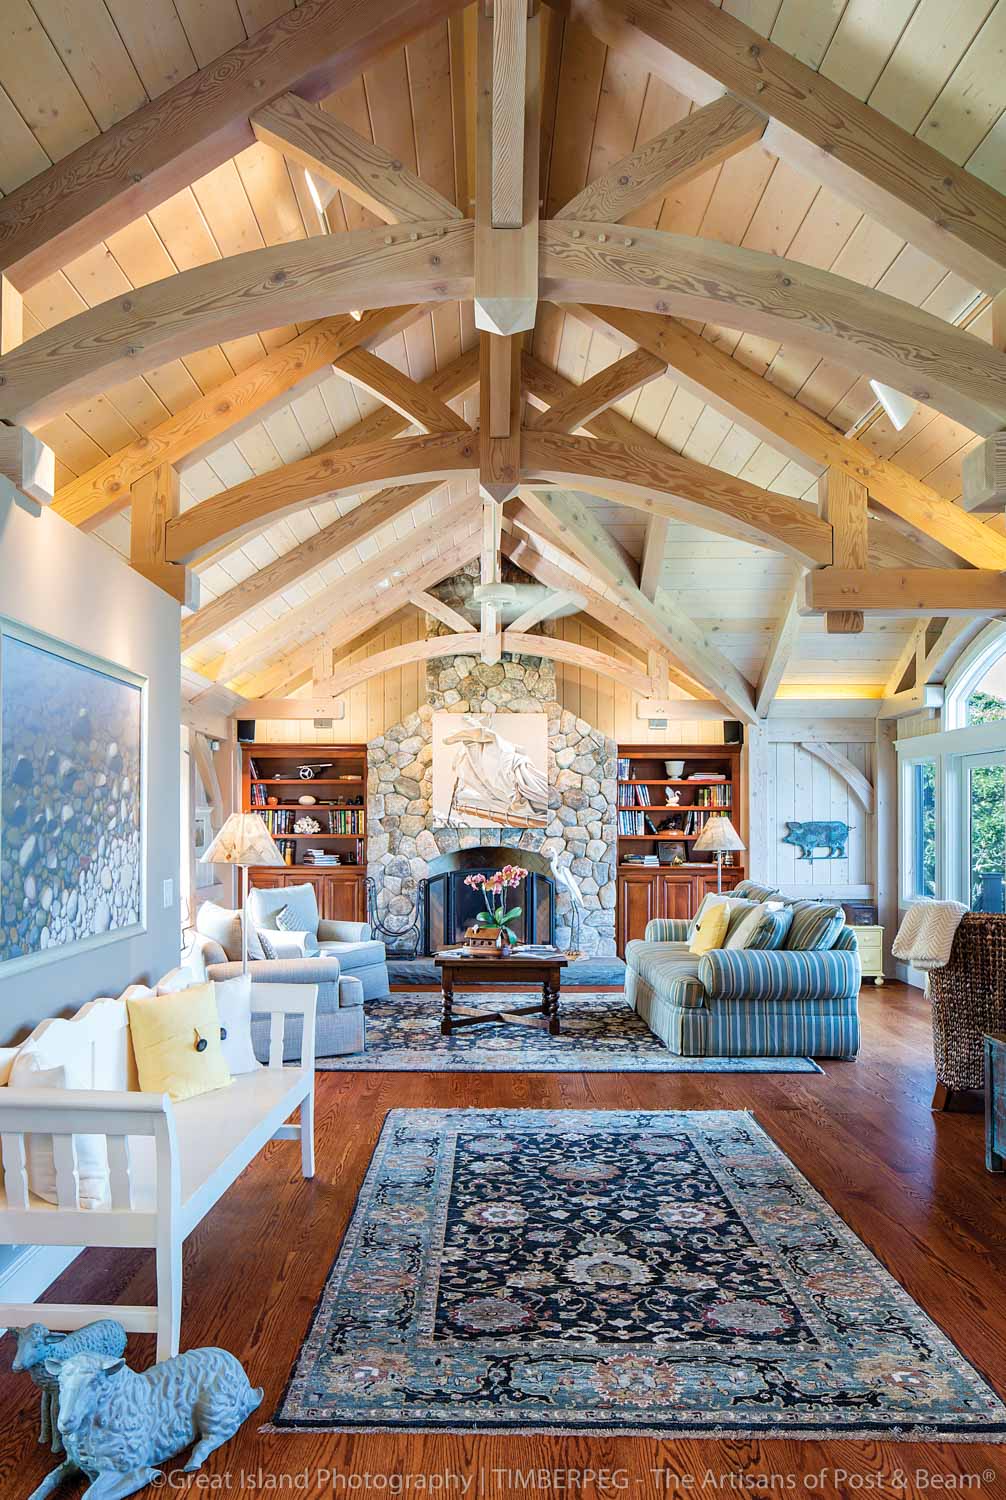 Aquinnah Martha's Vineyard, MA (5806) great room with large stone fireplace and curved trusses